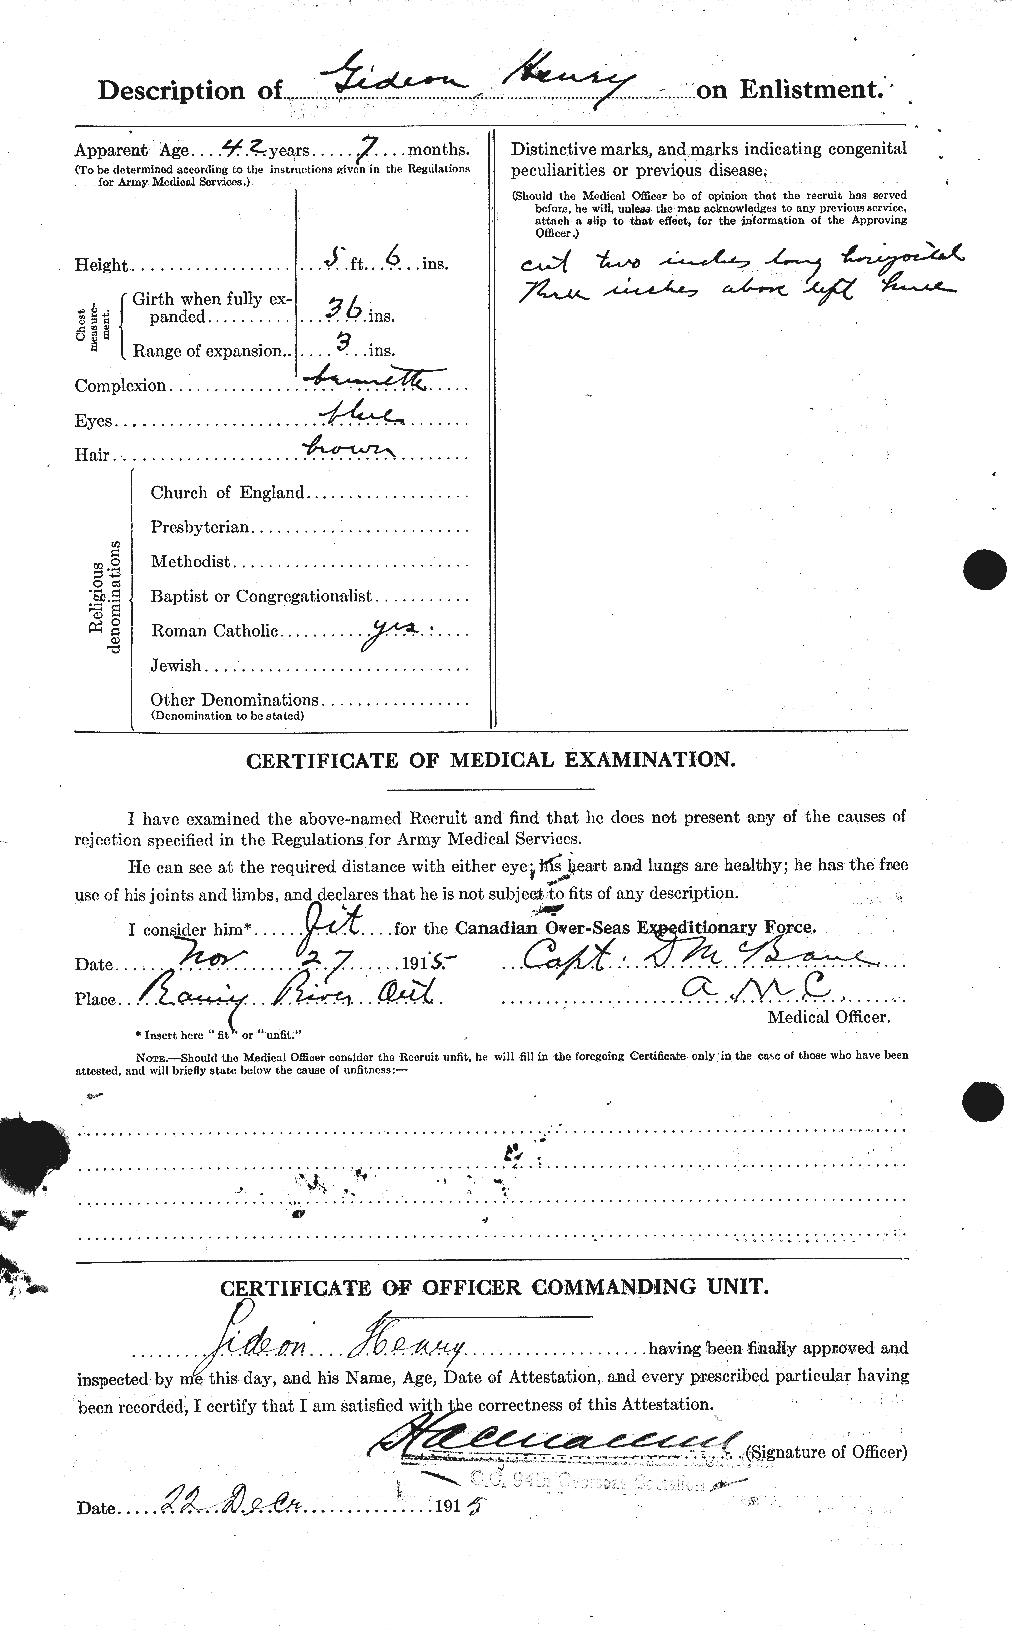 Personnel Records of the First World War - CEF 389197b